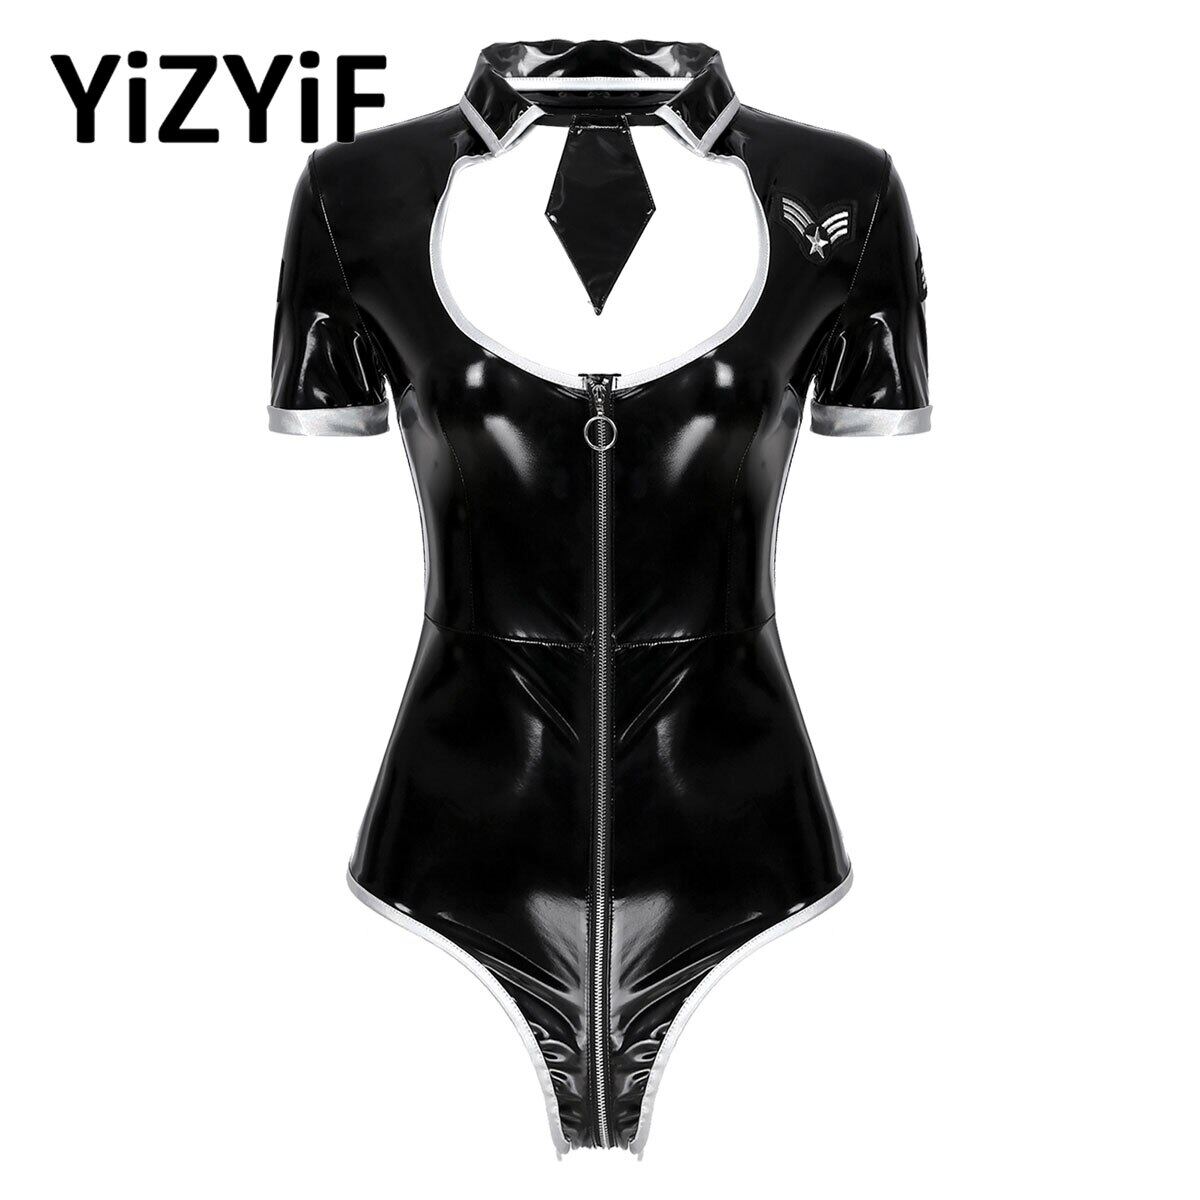 Hot Sexy Police Woman Officer Uniform Costume Wet Look Patent Leather Zipper Bodysuit Catsuit